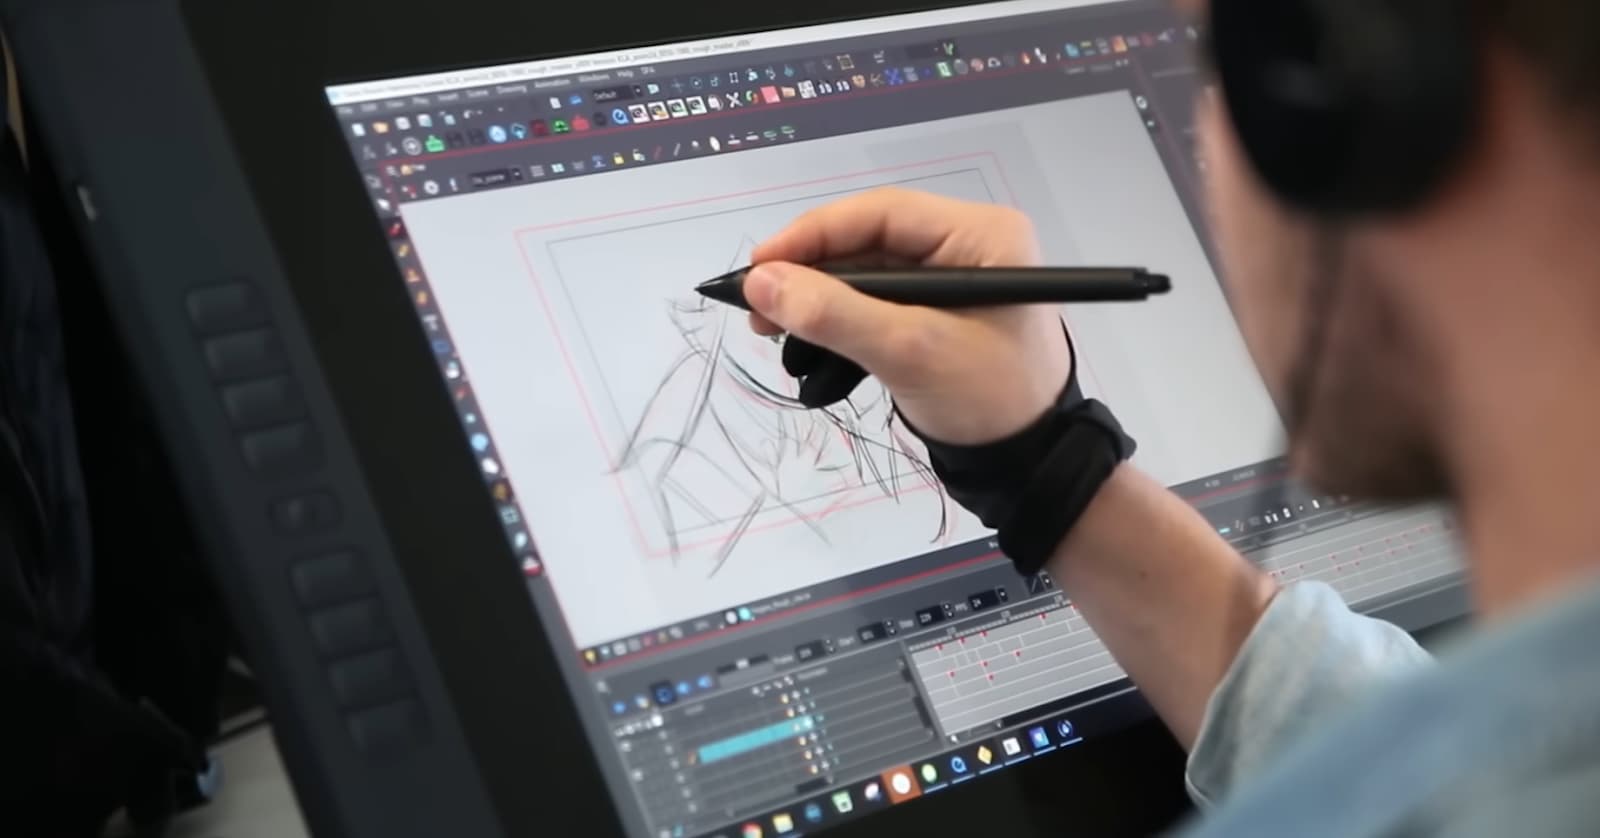 An artist sketching an abstract figure on a graphic tablet with stylus